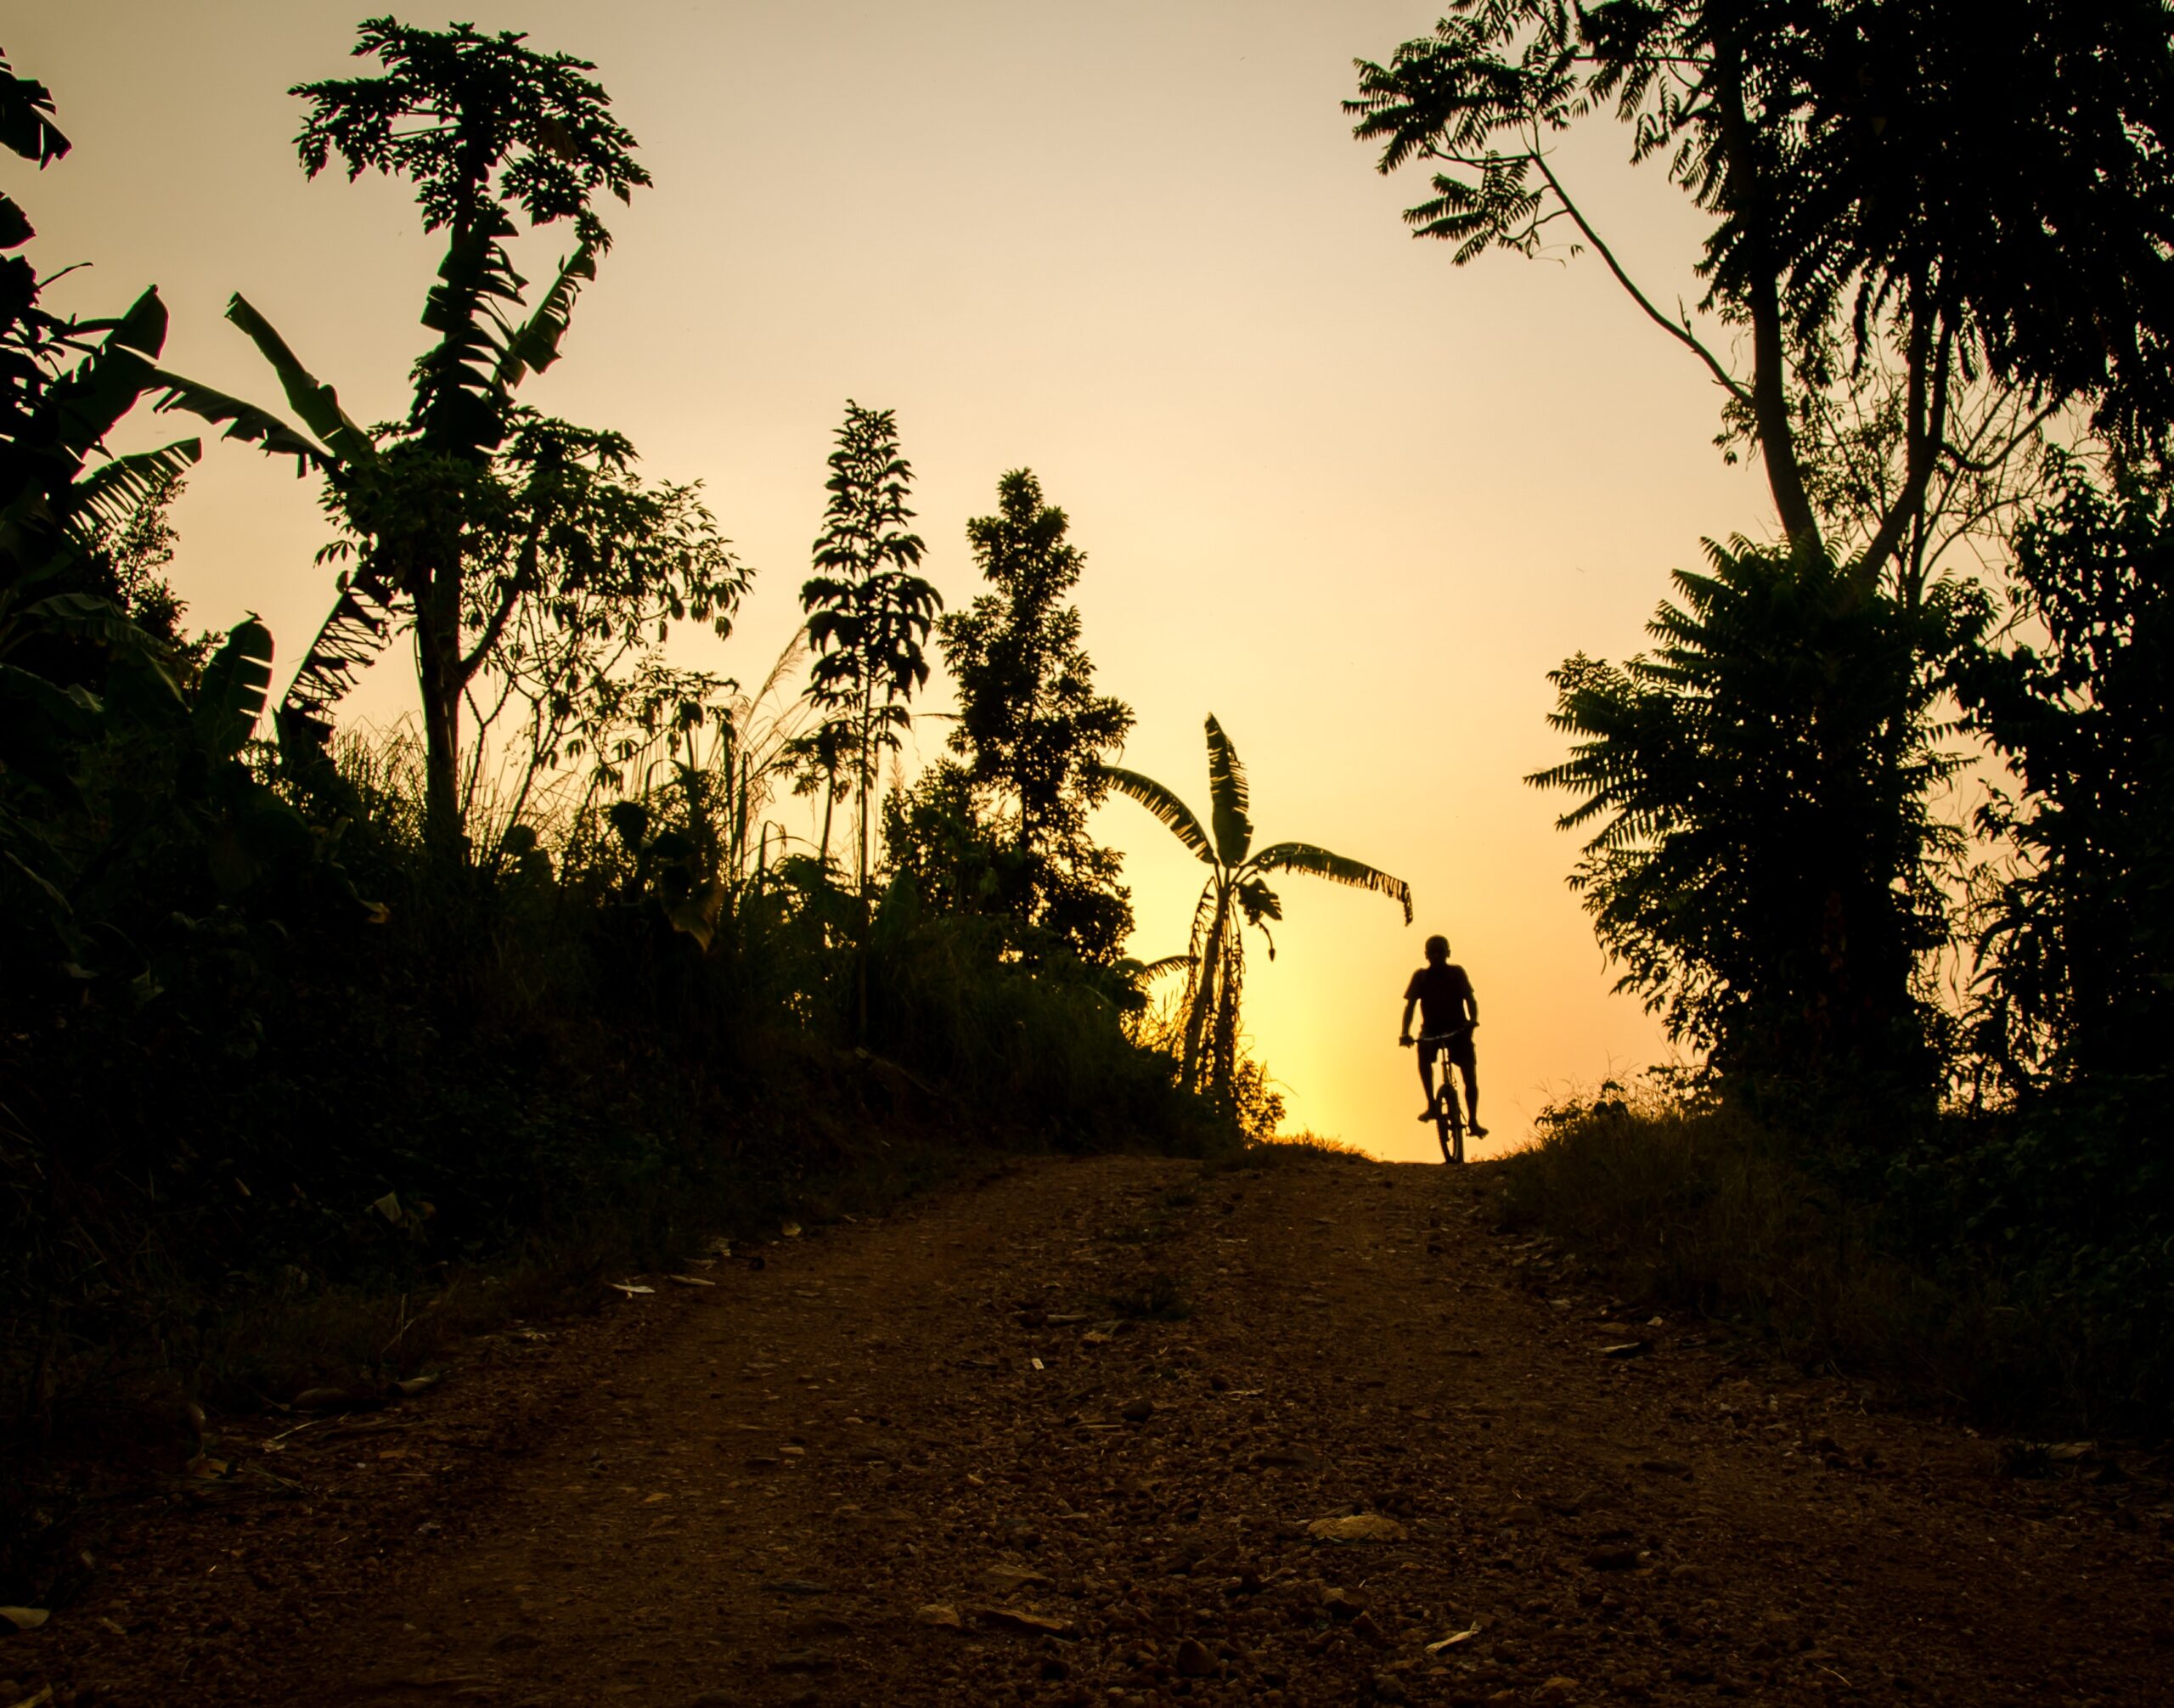 A person cycling on a dirt road at sunset (Credit: Jeff Ackley, Unsplash)